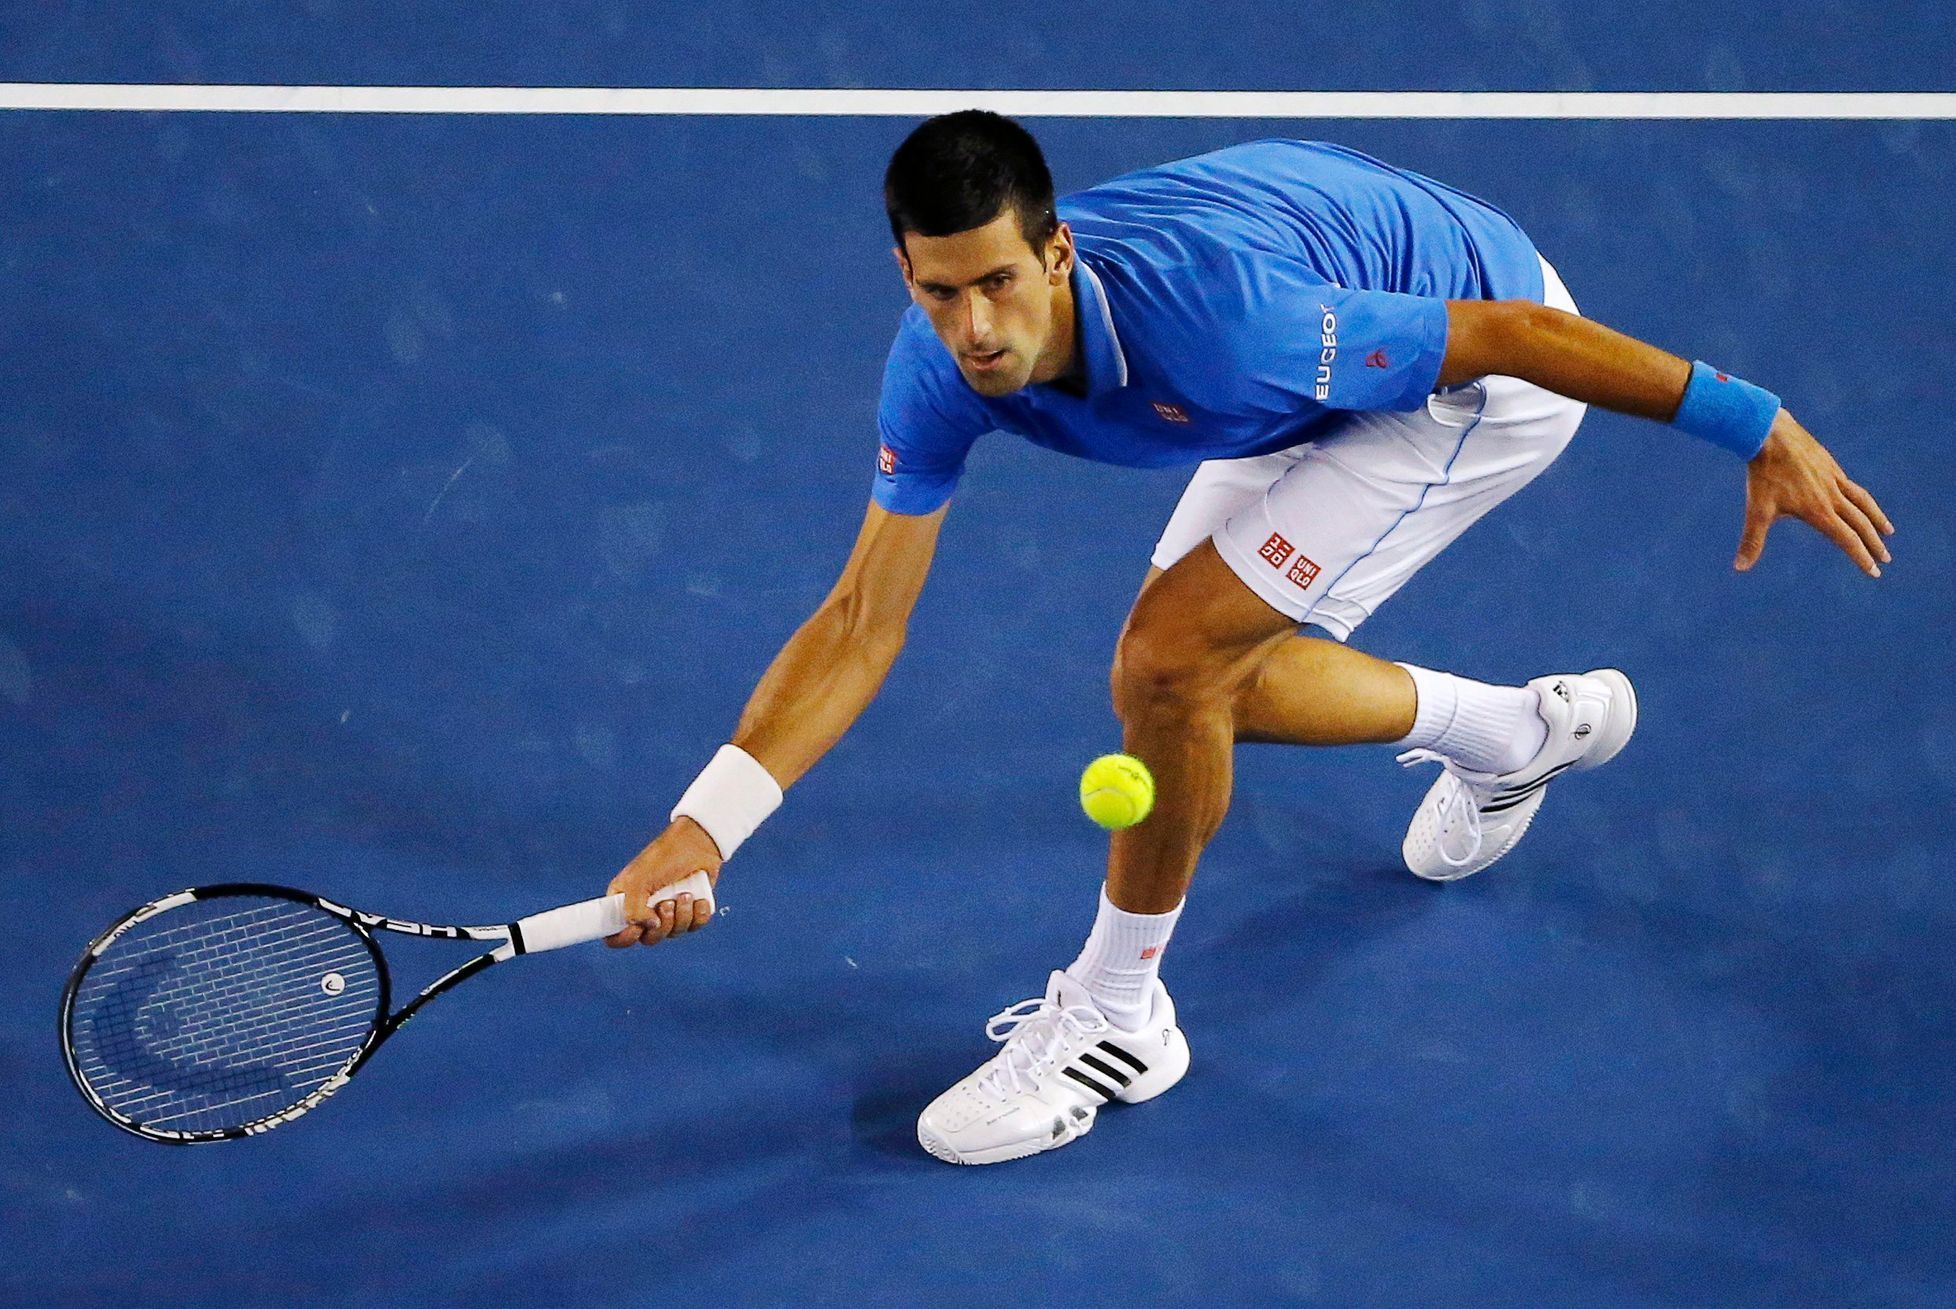 Djokovic of Serbia hits a return to Murray of Britain during their men's singles final match at the Australian Open 2015 tennis tournament in Melbourne